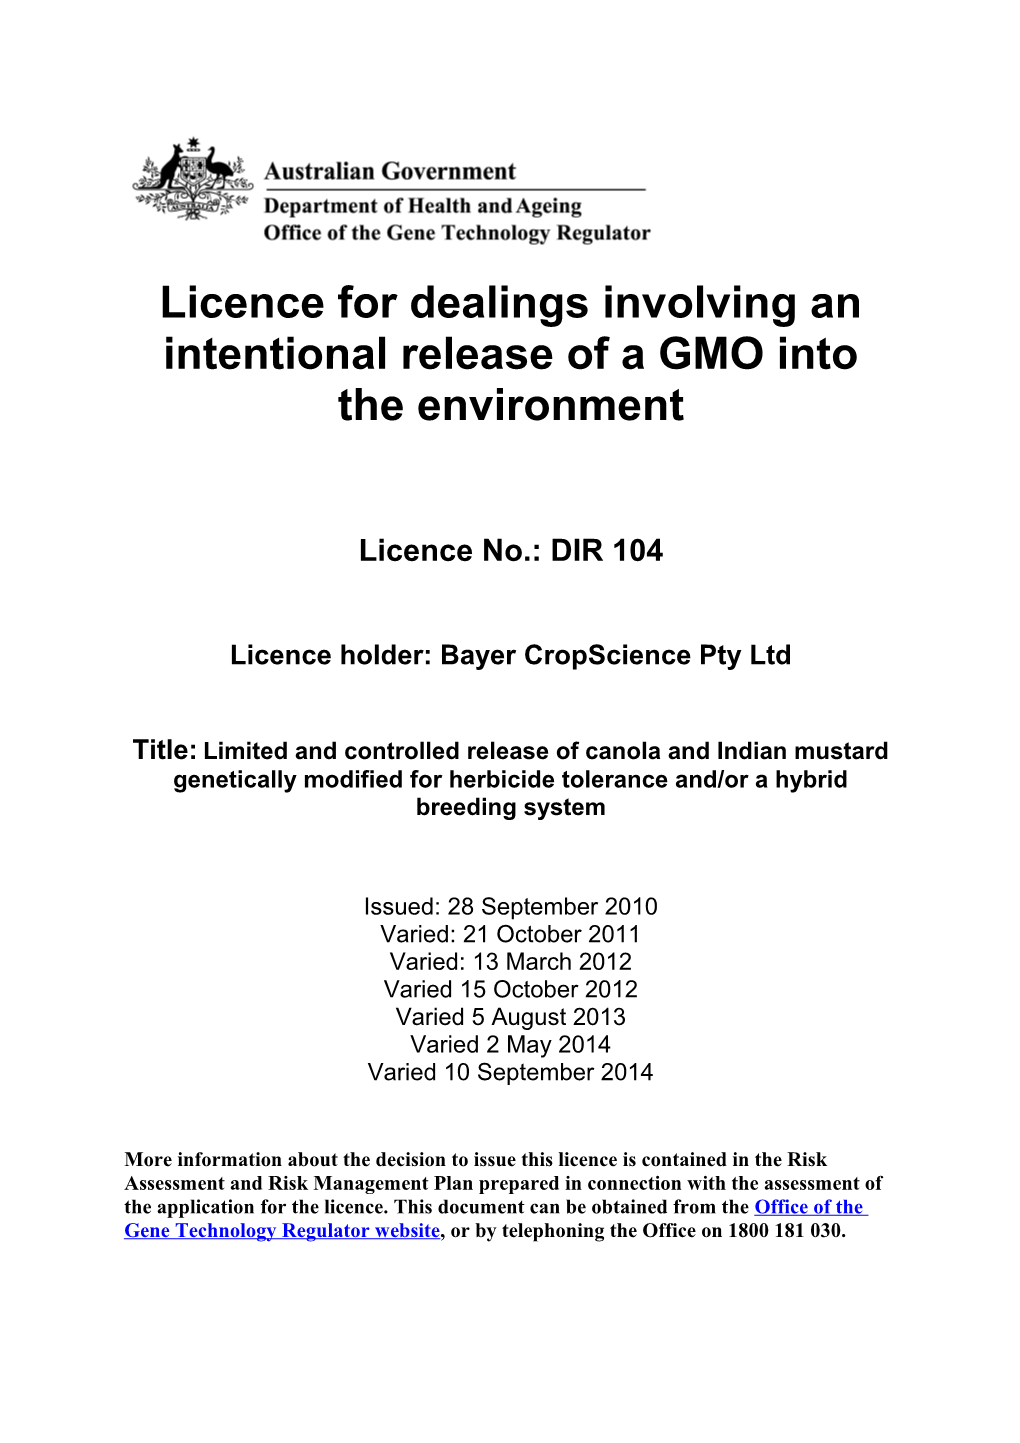 Licence for Dealings Involving an Intentional Release of a GMO Into the Environment